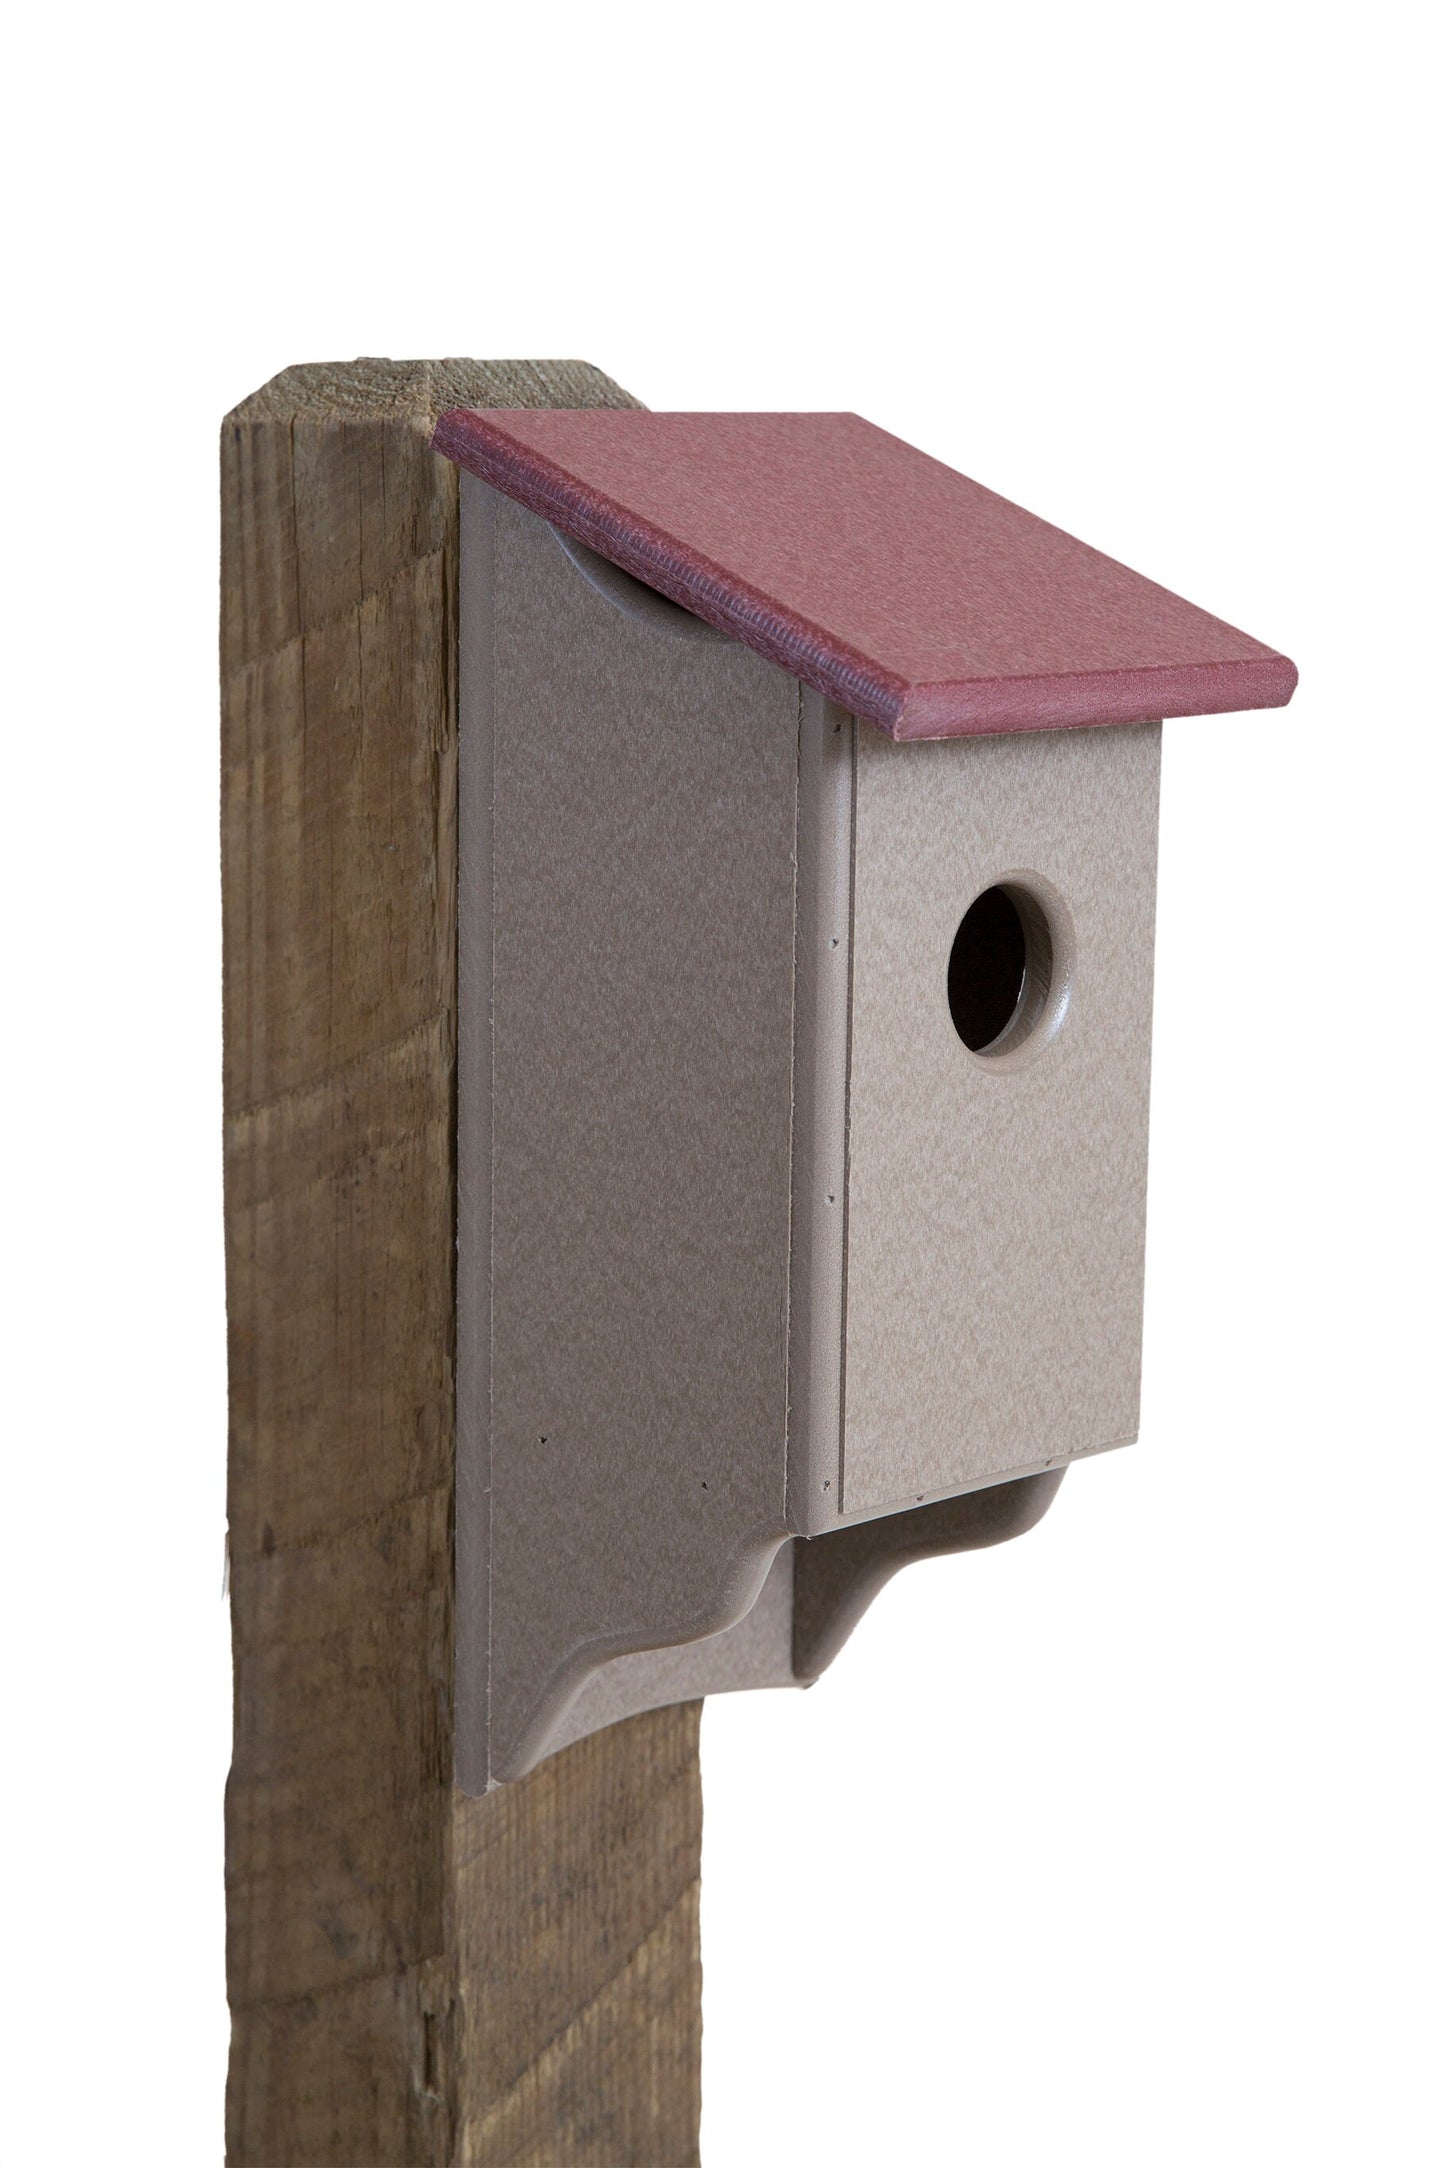 10 Small Poly one hole Bluebird House | Multiple Colors